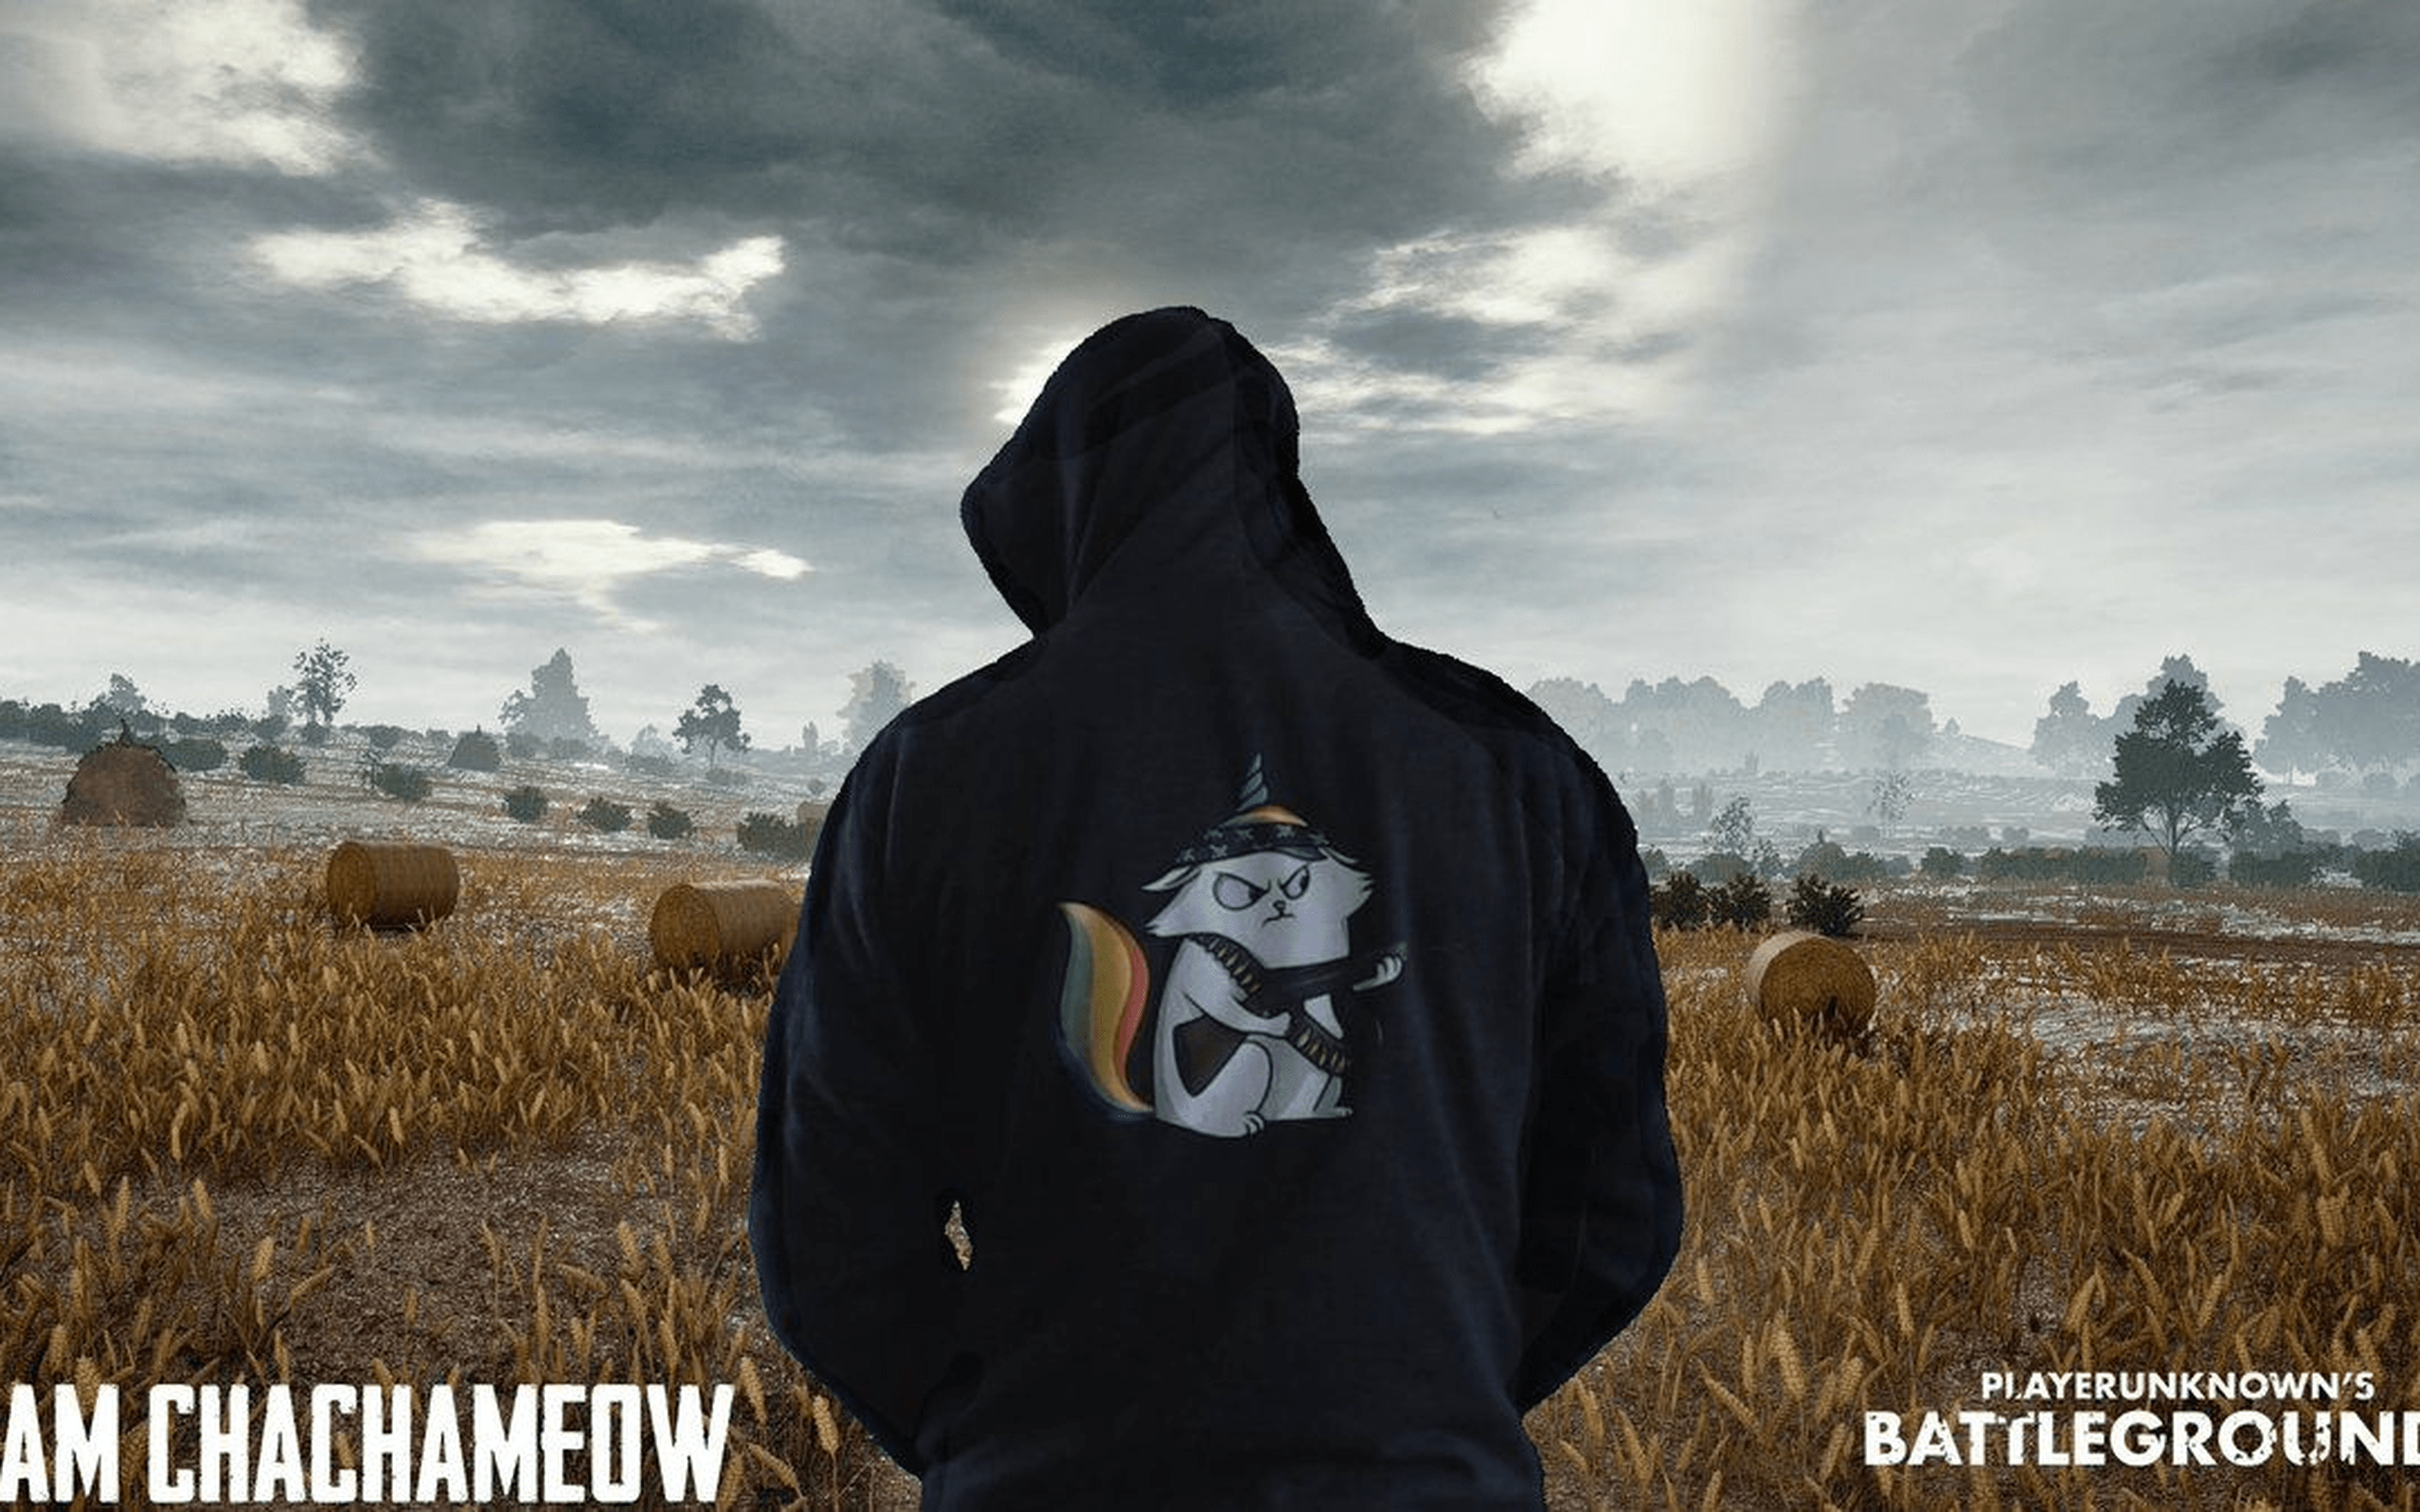 4K Ultra HD 16:10 Team Chachameow Pubg Wallpapers : Games Wallpapers